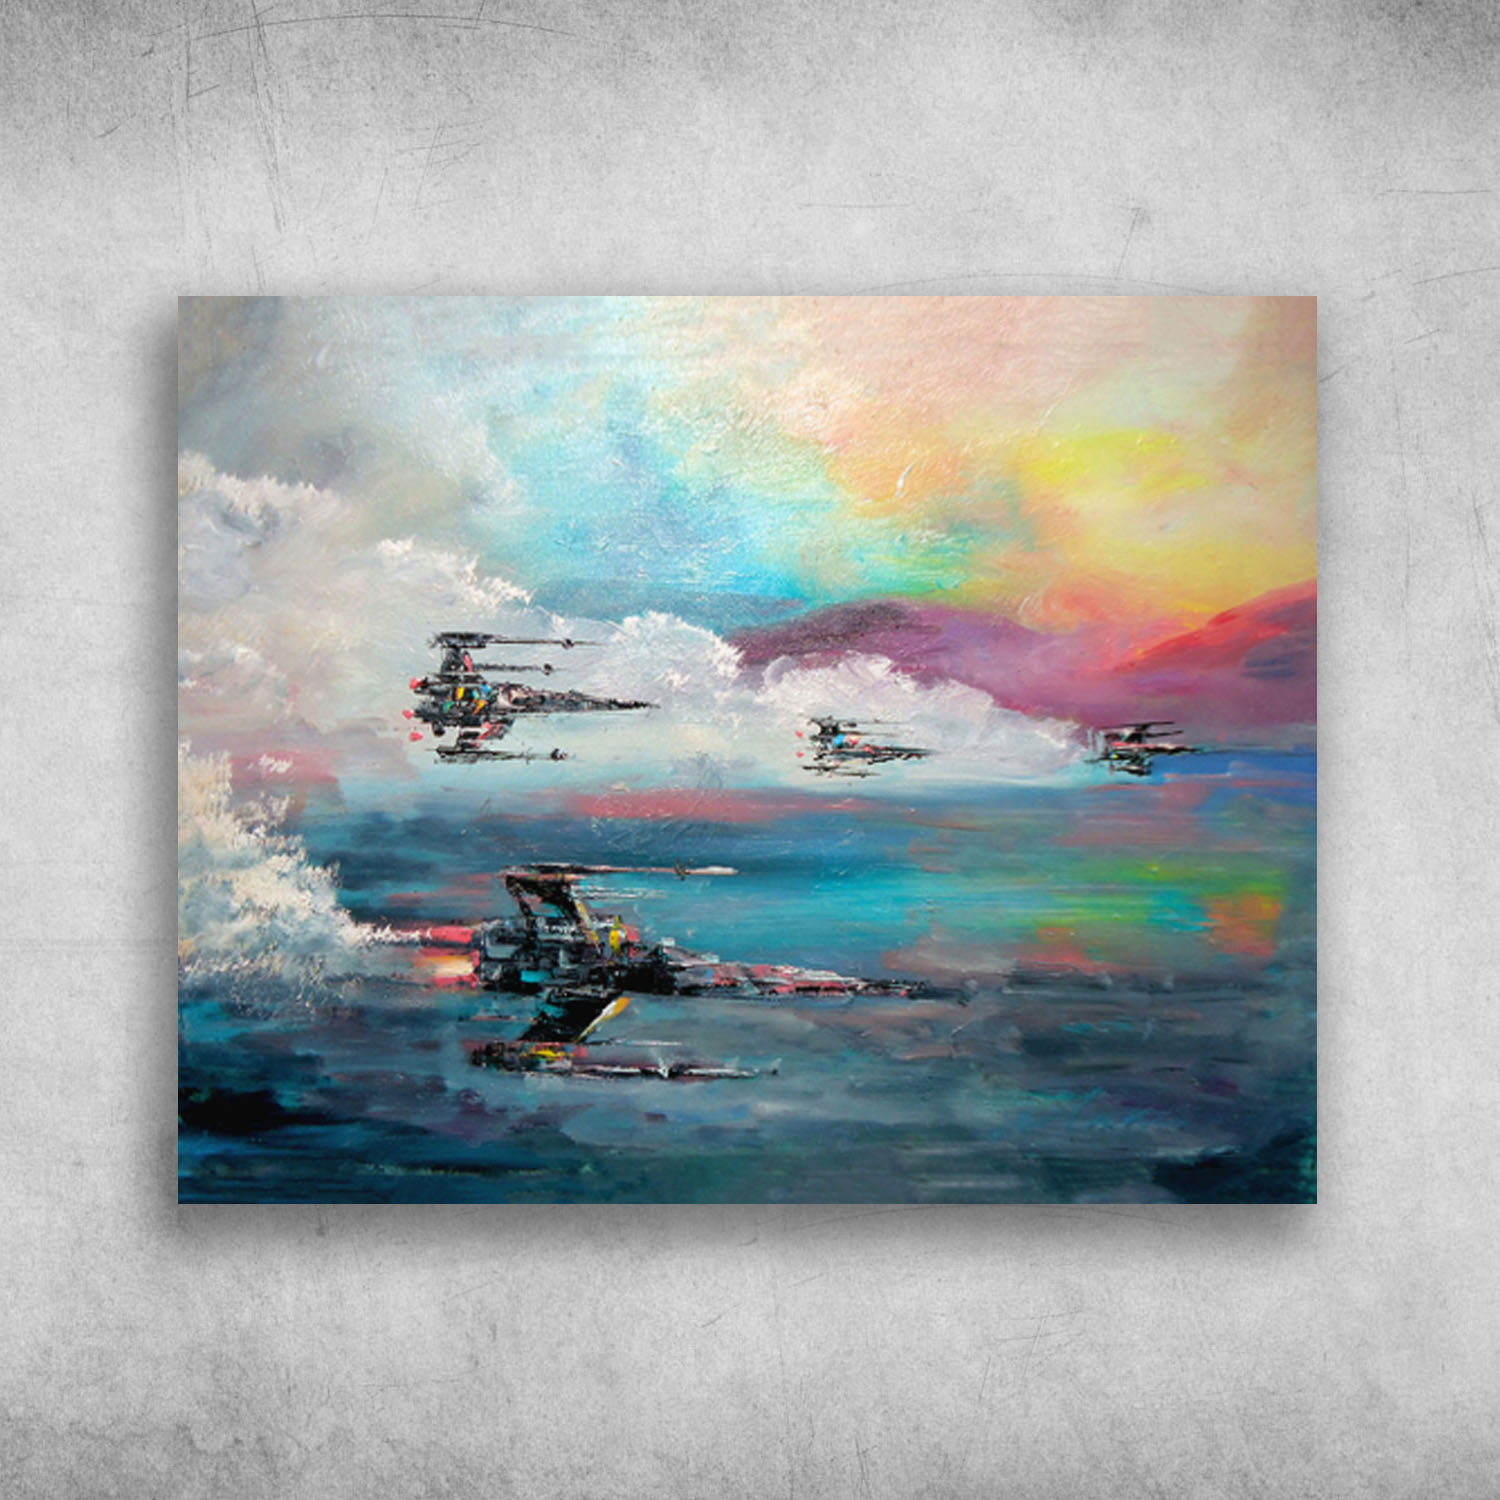 My Oil Painting Of X-Wing Fighters